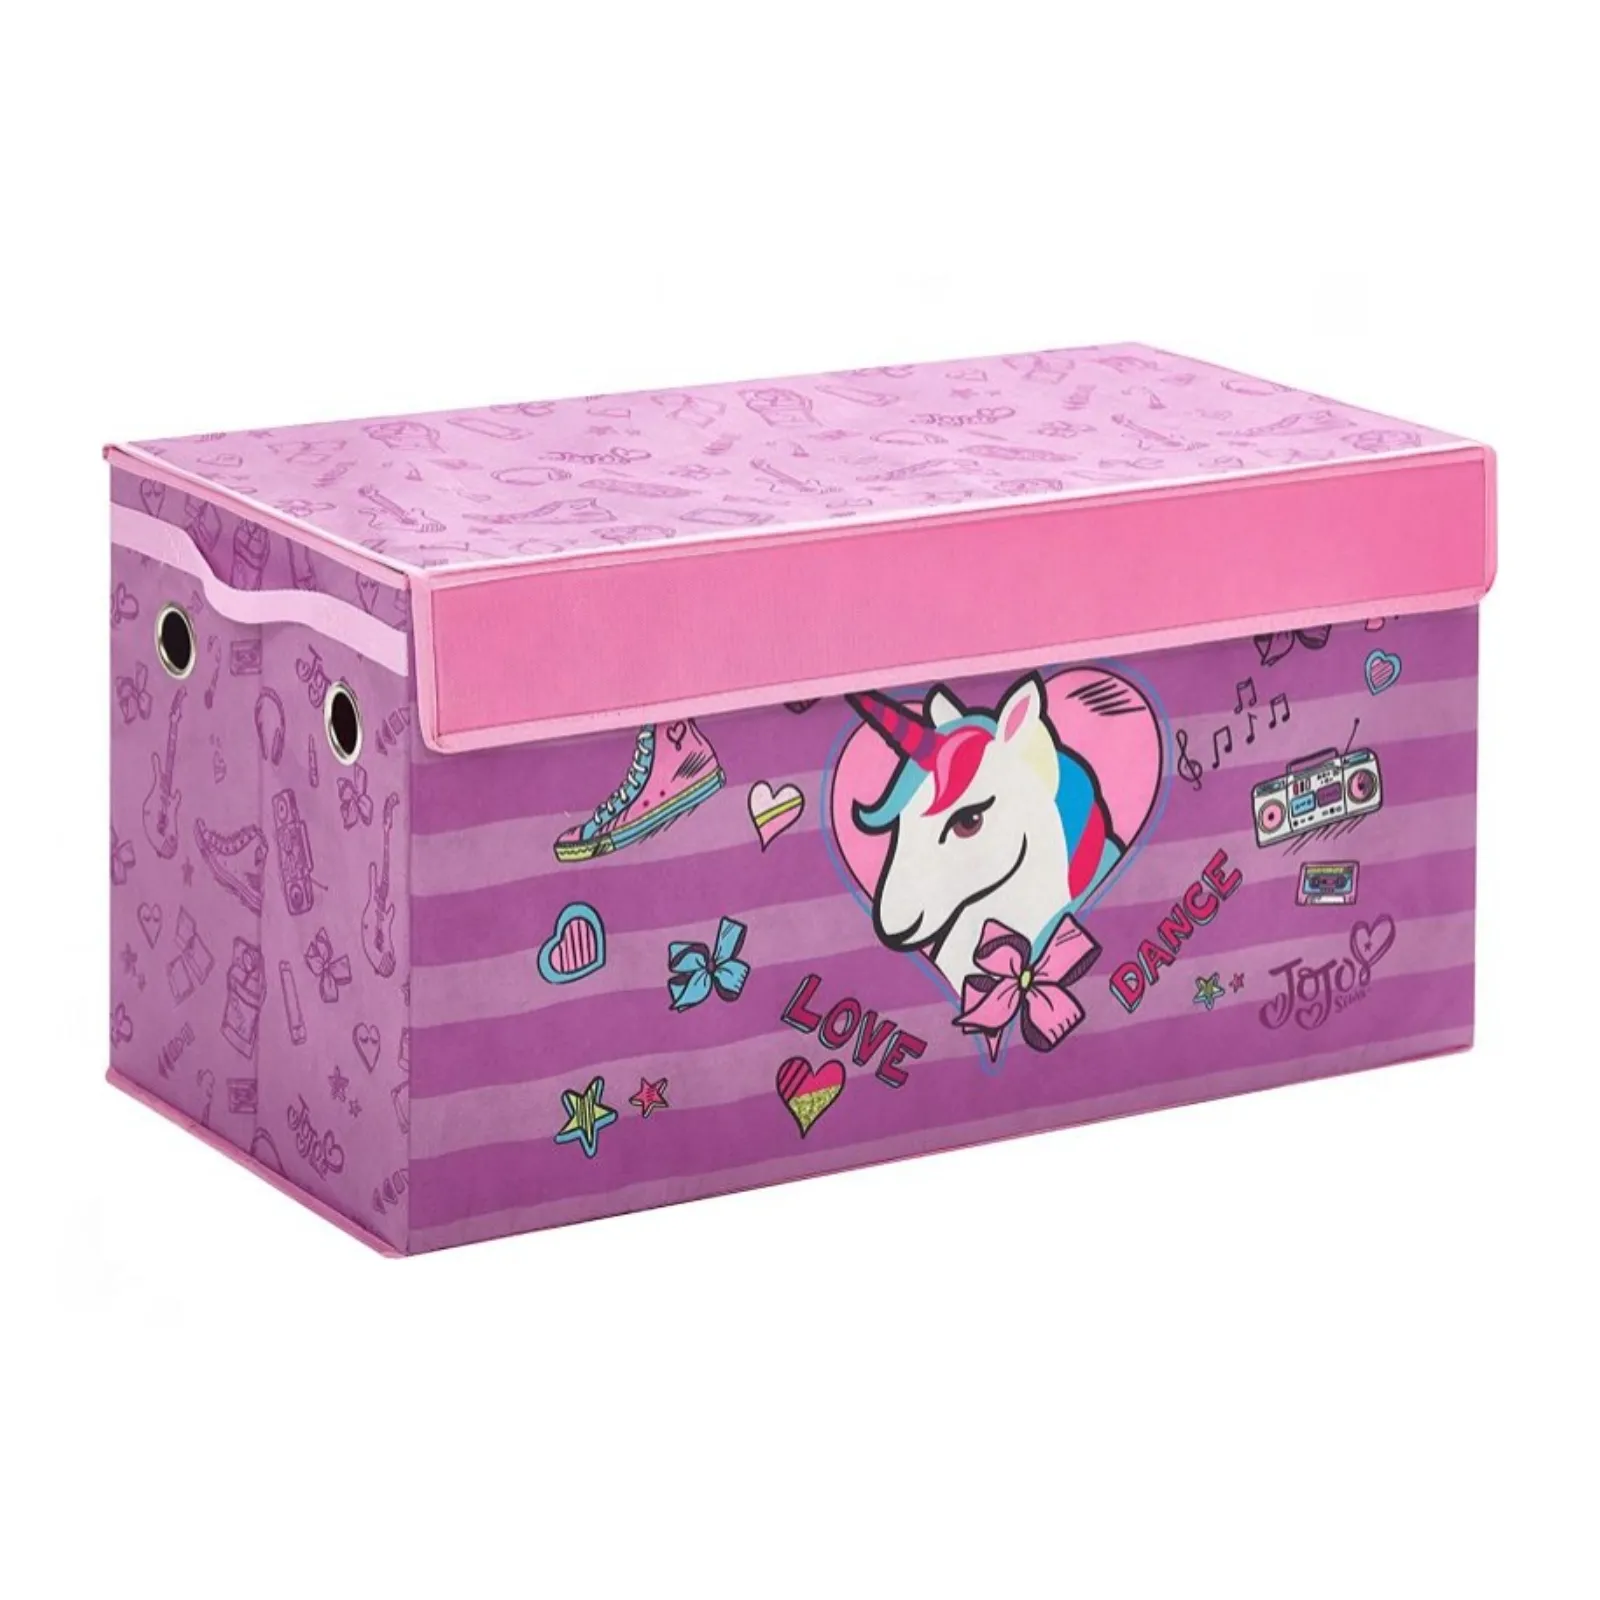 Cute Collapsible Durable Canvas Unicorn Children Toy Storage Trunk Box Organizer for Kids Girls Boys Playroom with Lid